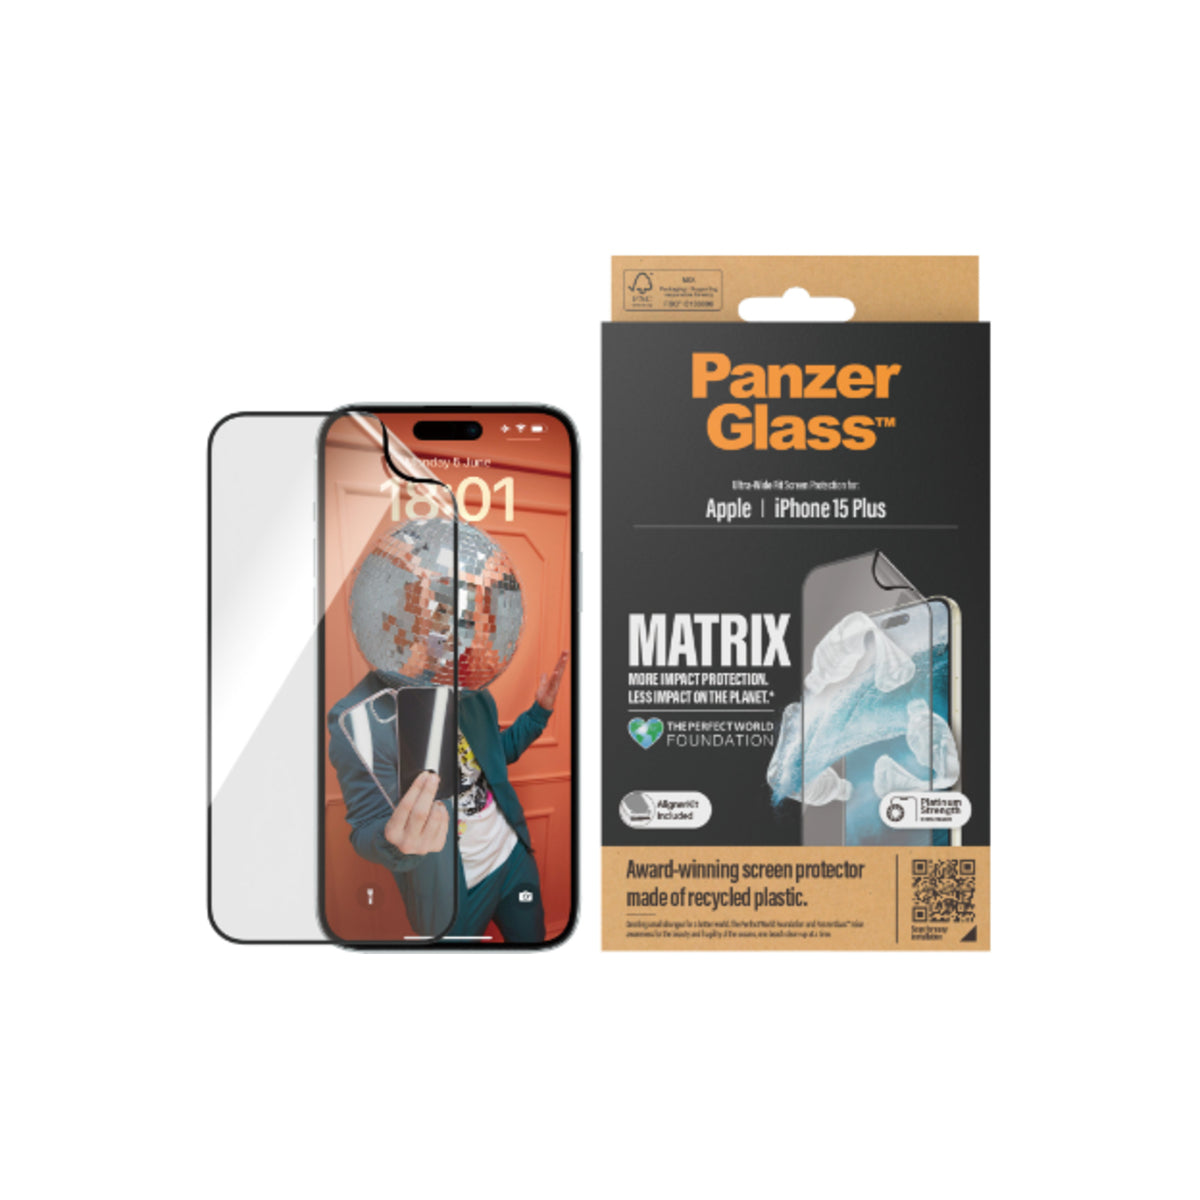 PanzerGlass Matrix Ultra Wide Screen Protector and AlignerKit for iPhone 15 Plus